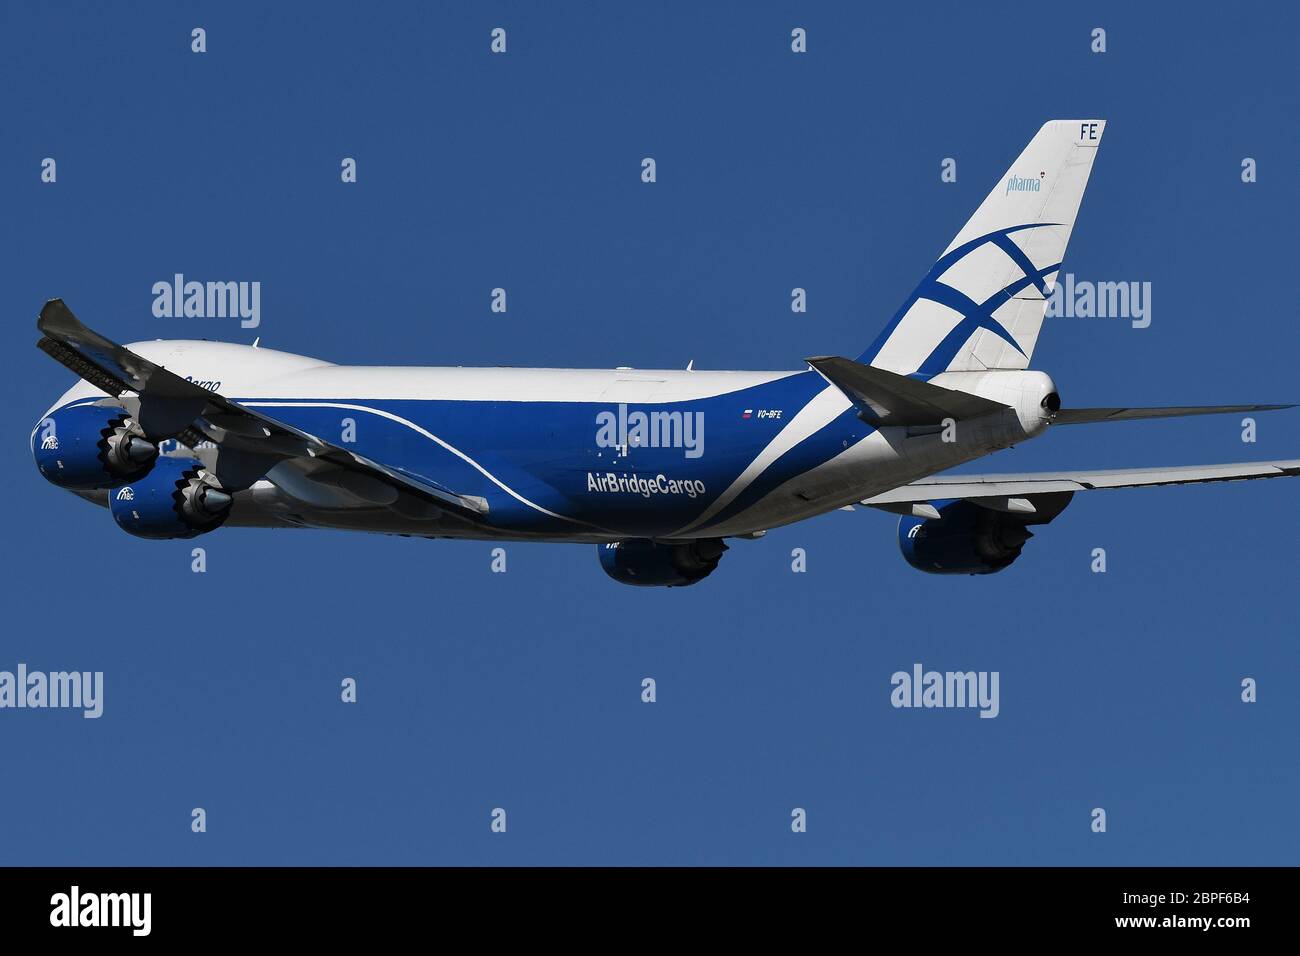 DELIVERING PPE AROUND THE WORLD, BOEING 747 FREIGHTER OF AIR BRIDGE CARGO. Stock Photo